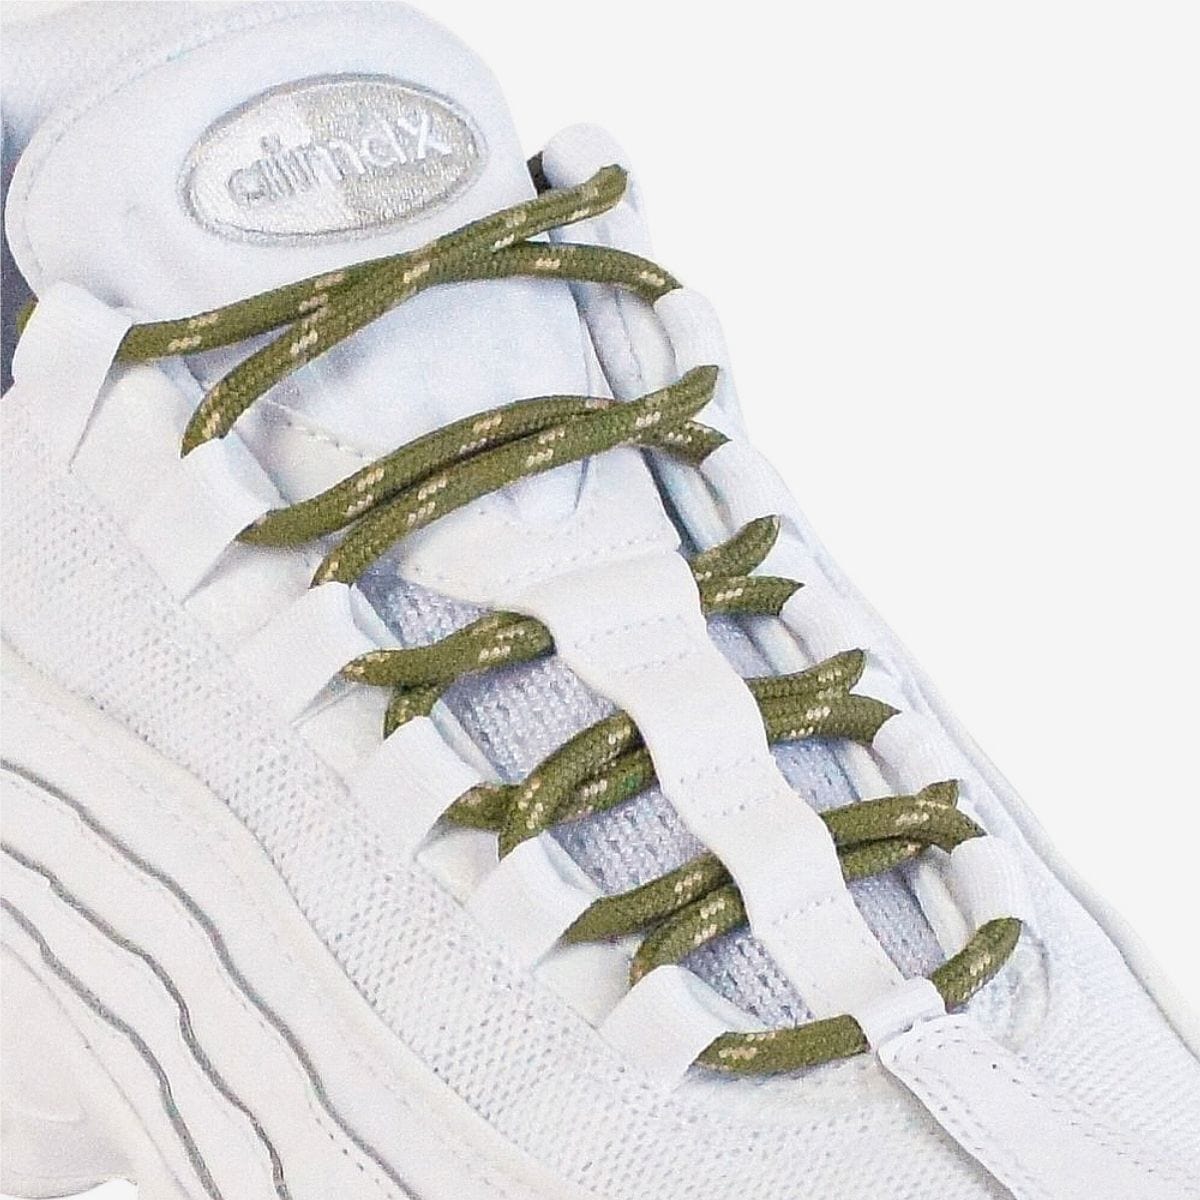 walking-shoe-laces-online-in-australia-colour-army-green-and-khaki